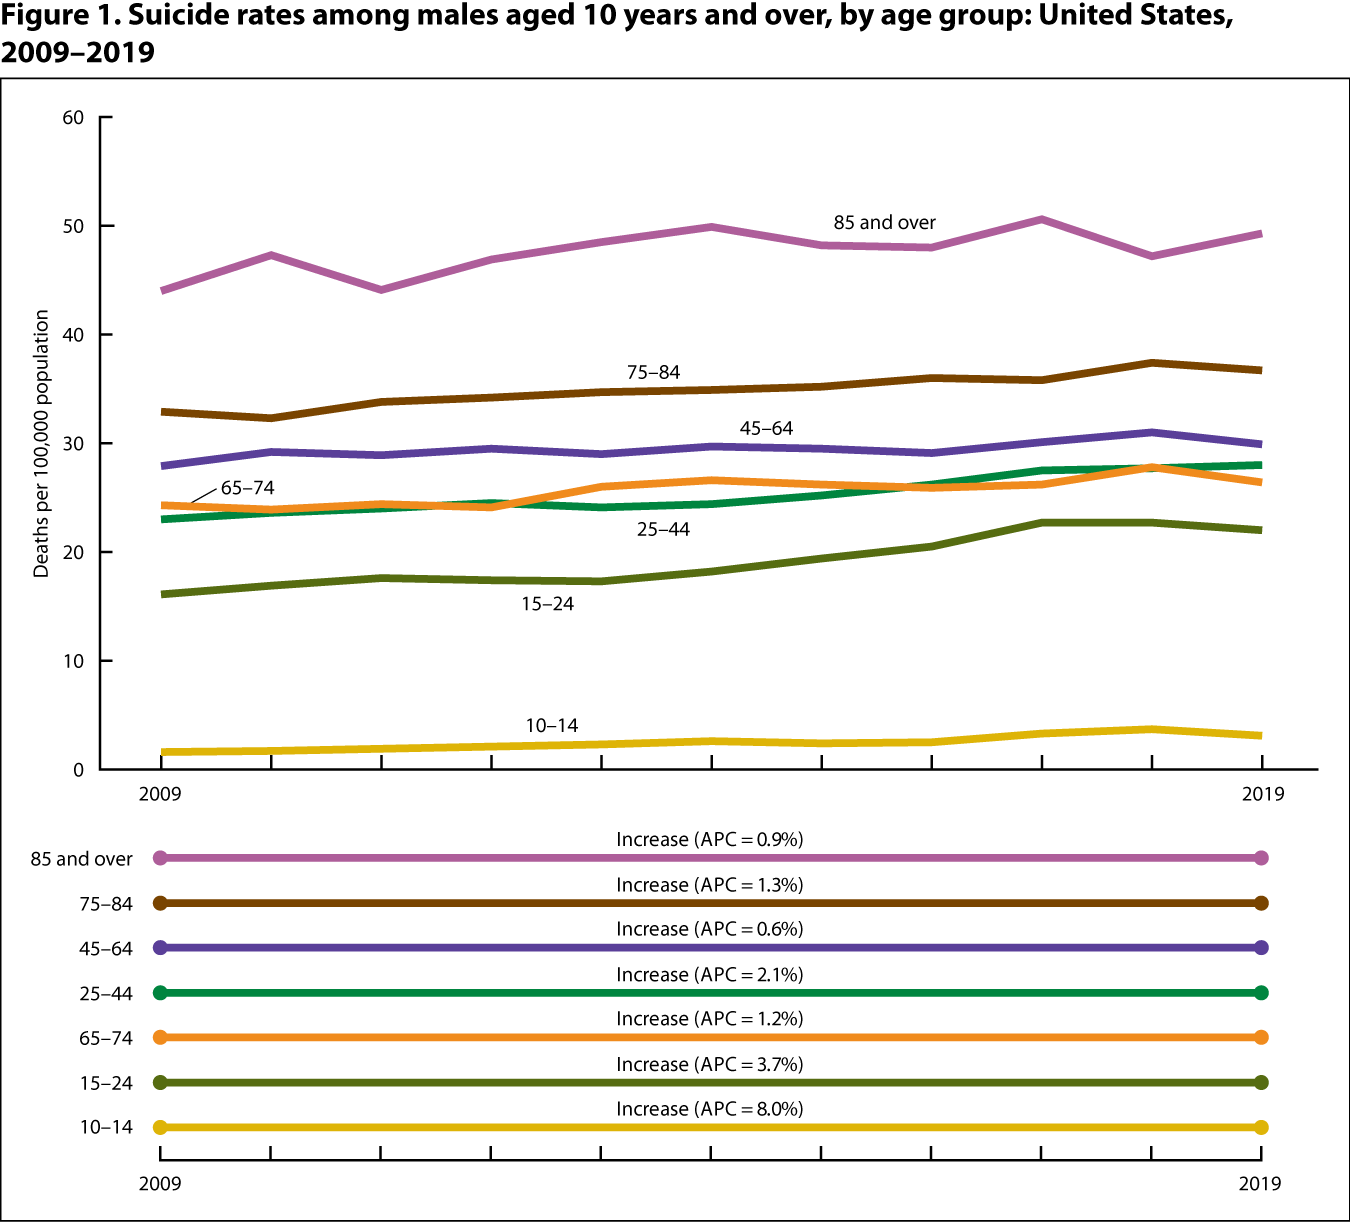 Figure 1 is a line graph showing suicide rates (deaths per 100,000 population) among males aged 10 years and over by age group for 2009 through 2019.